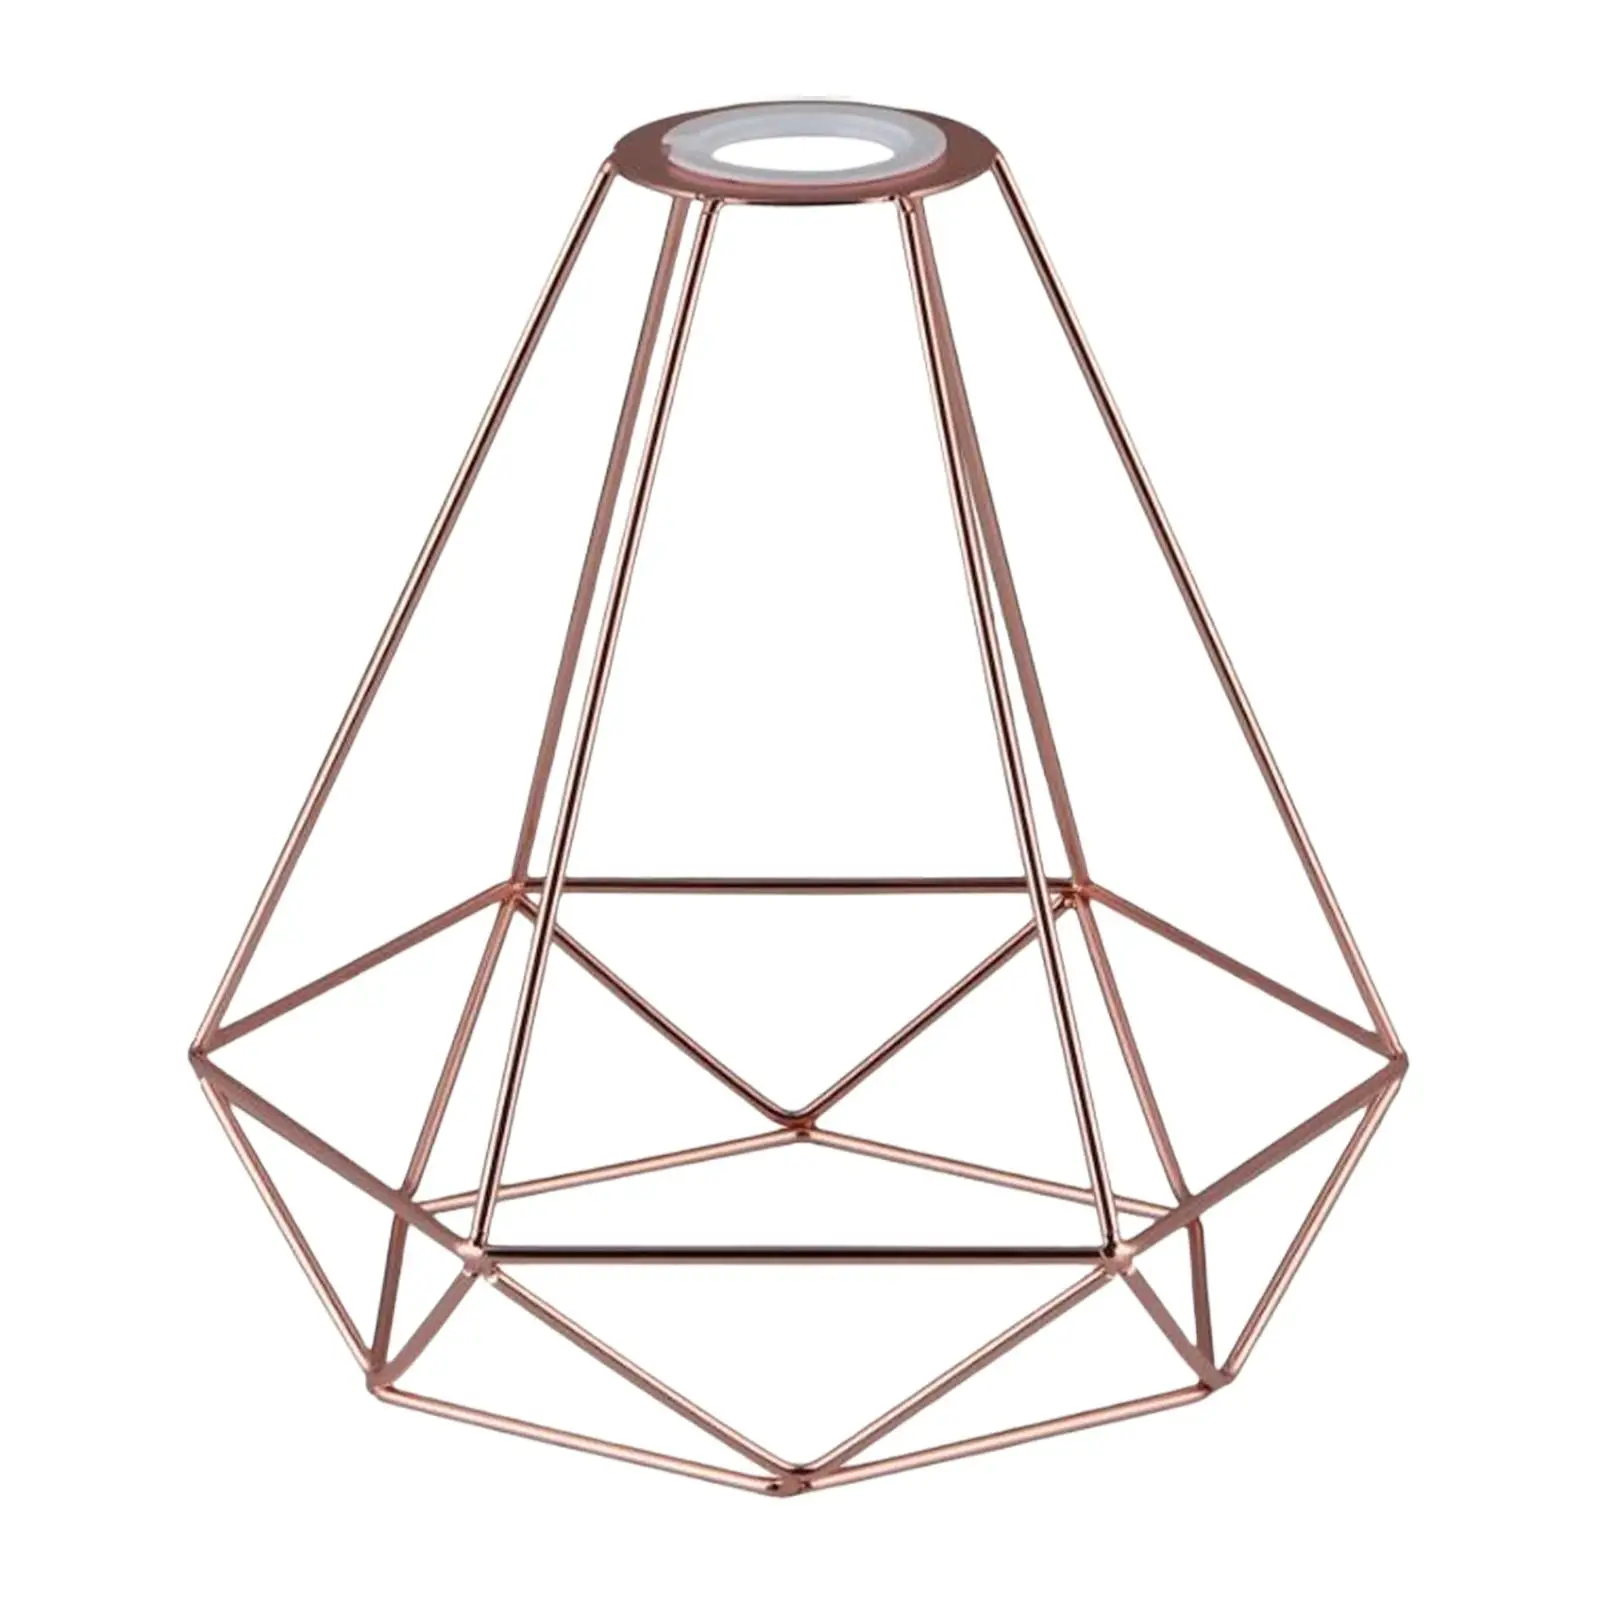 Pendant Lampshade Diamond Shape Decoration Light Bulb Cage Guard Practical Cover Wire Antique Holder for Ceiling Cafe Bedroom